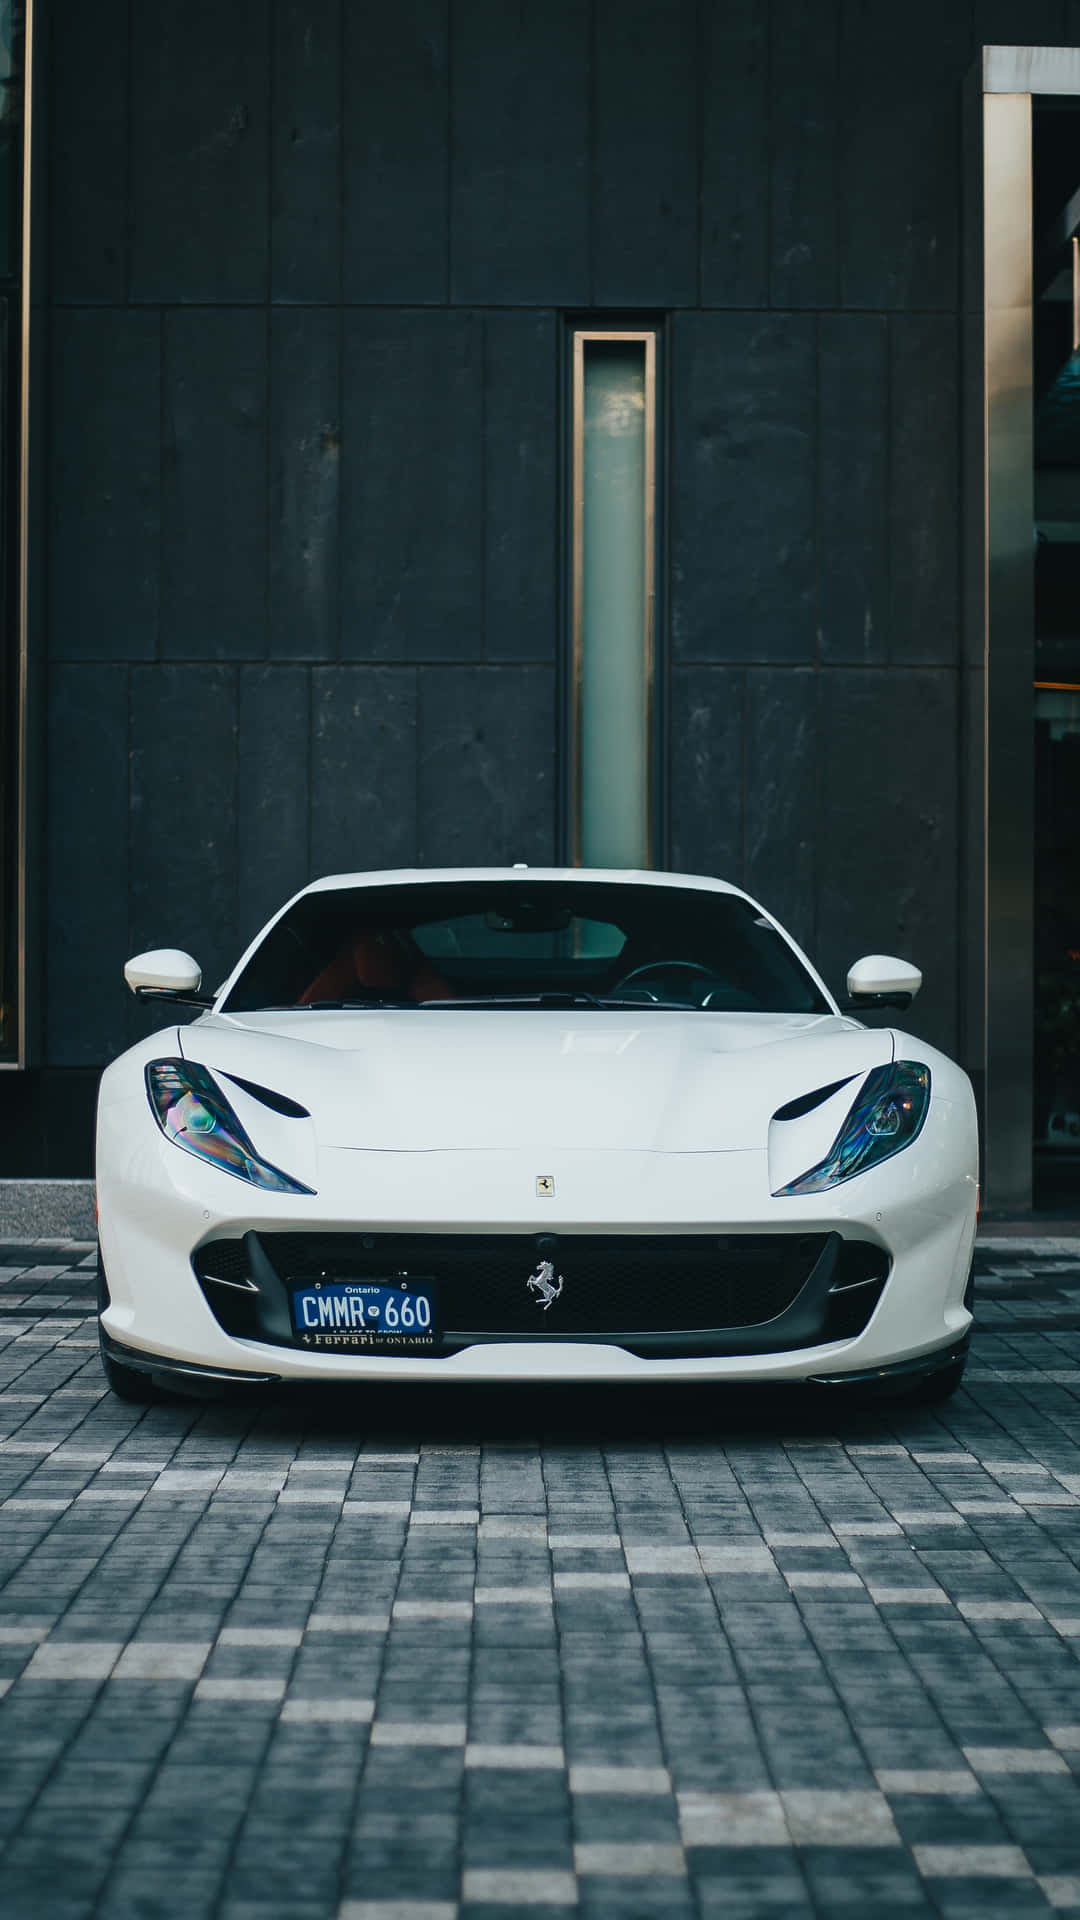 Driving luxury in style with a white Ferrari iPhone. Wallpaper